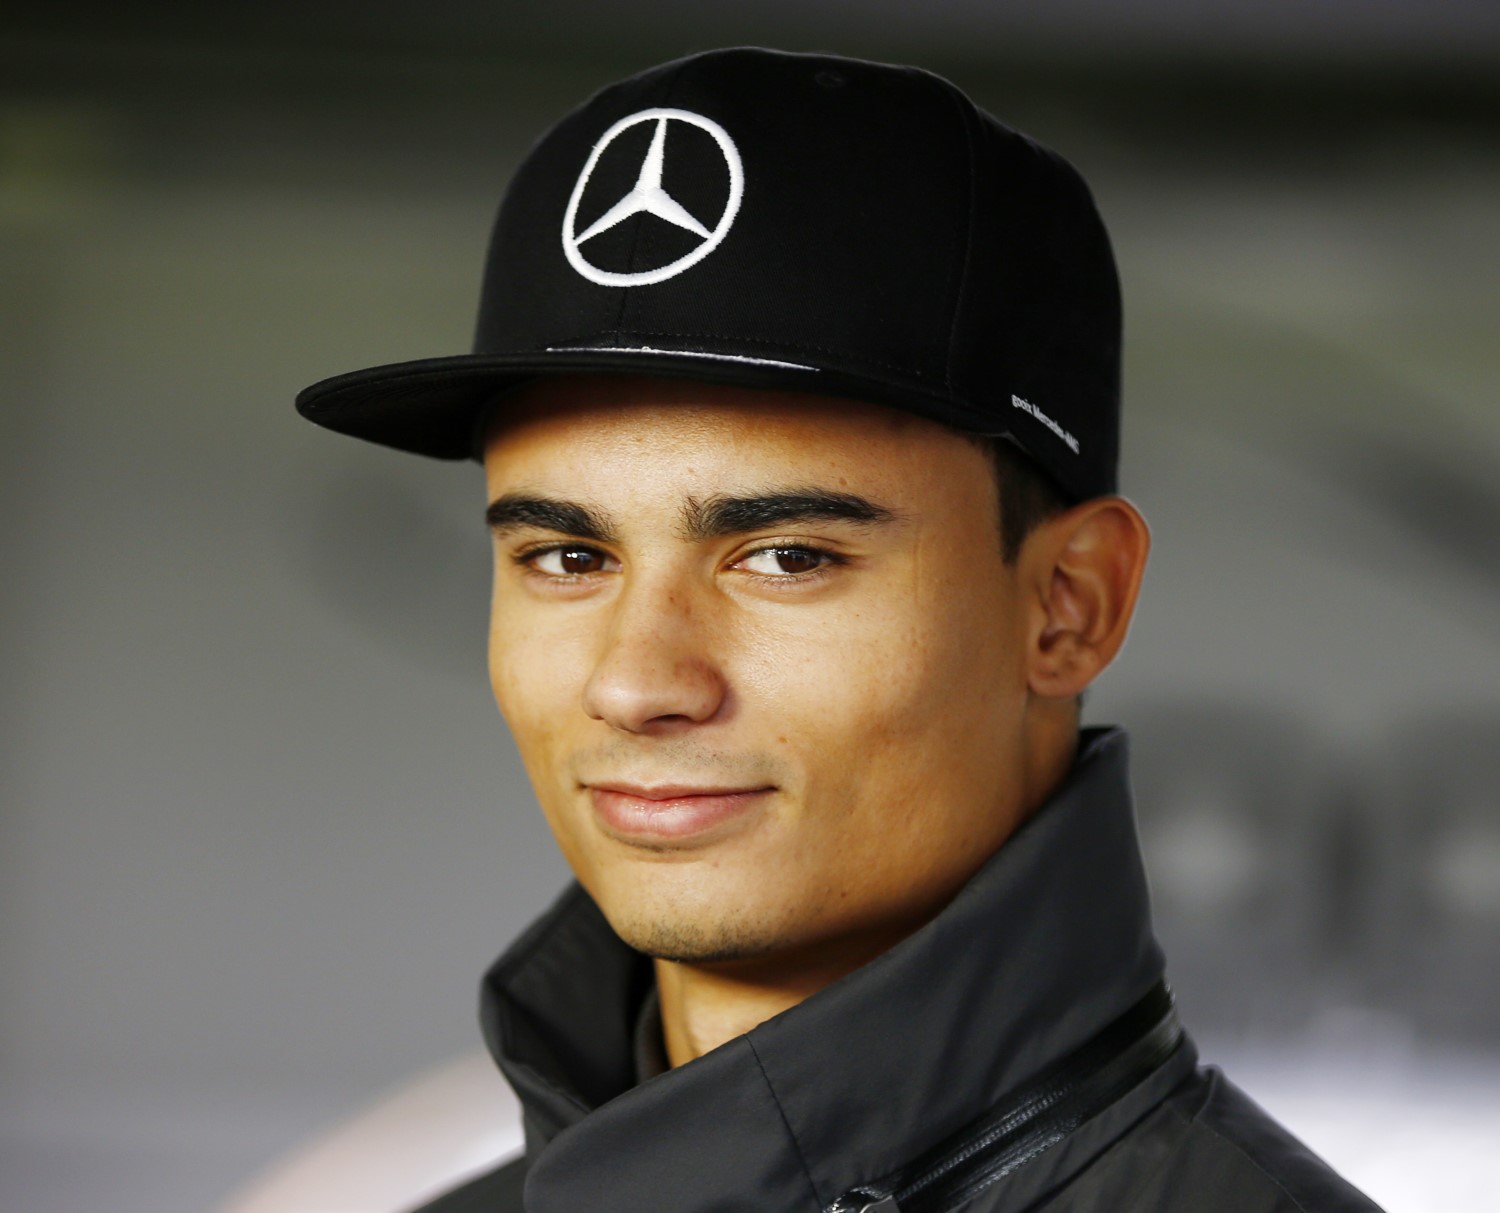 Pascal Wehrlein is said to have a sizable check to buy a Toro Rosso ride. He is not a Red Bull junior, but money buys anyone a ride in F1